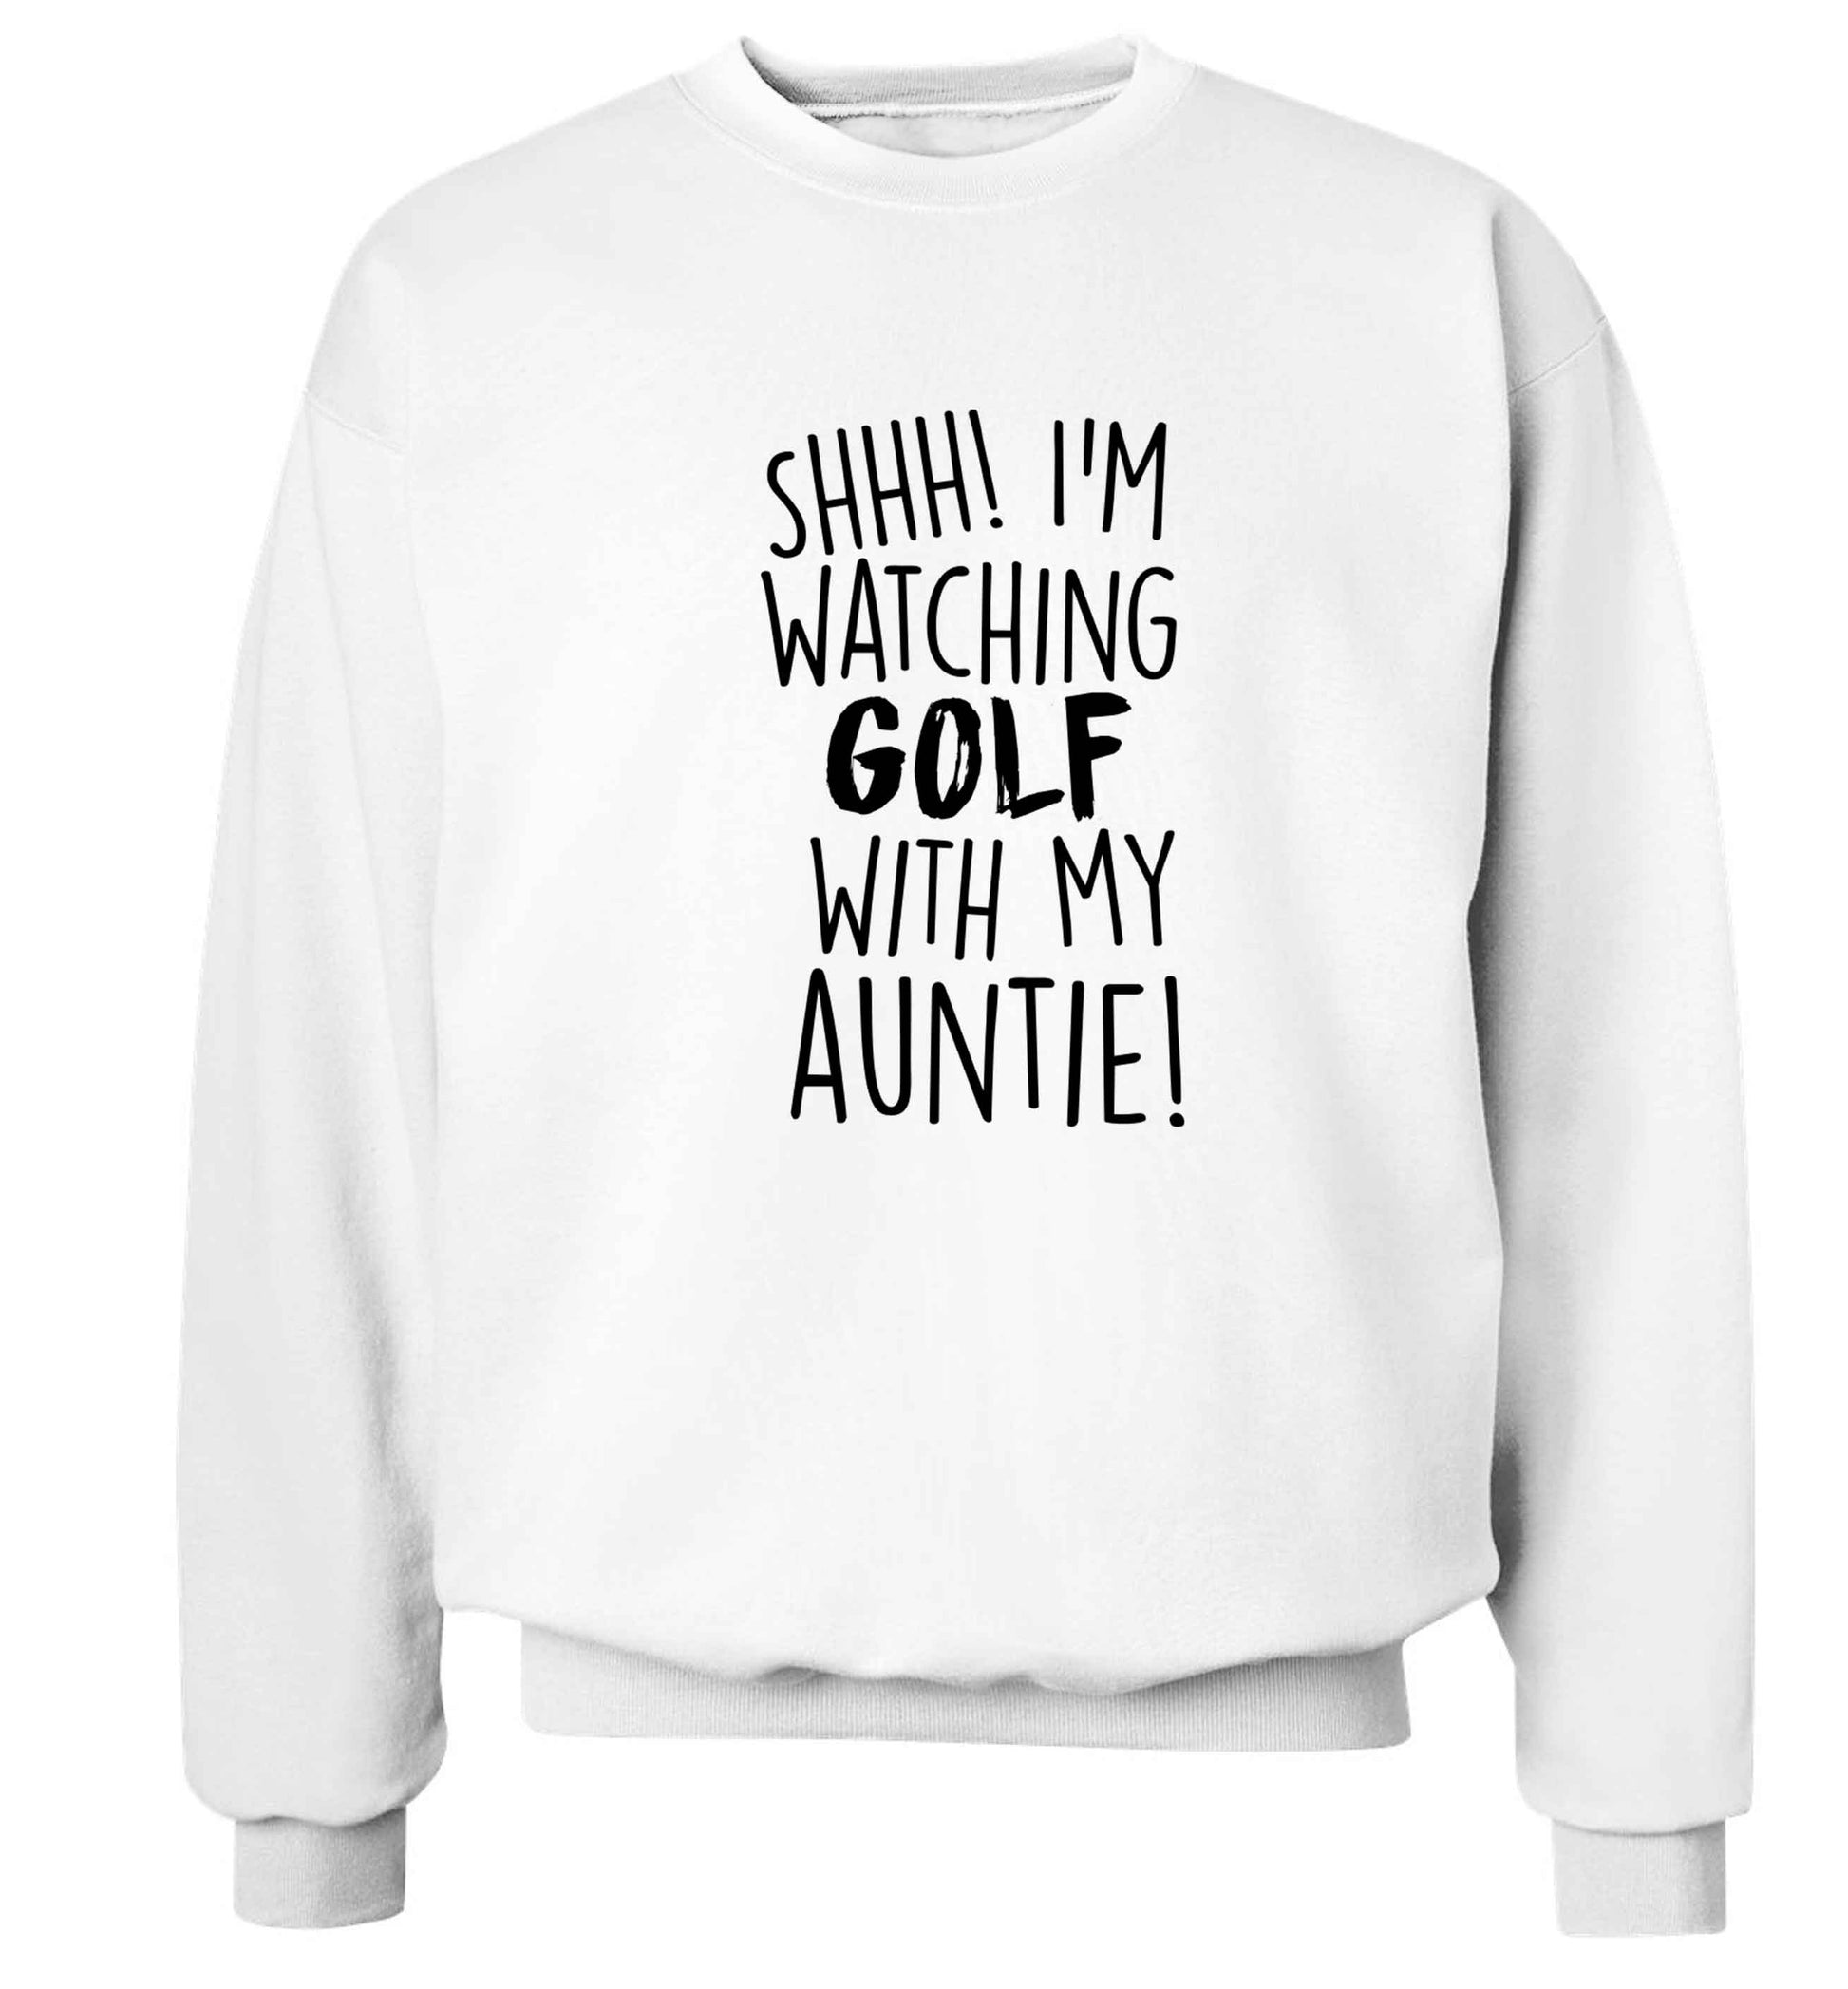 Shh I'm watching golf with my auntie Adult's unisex white Sweater 2XL